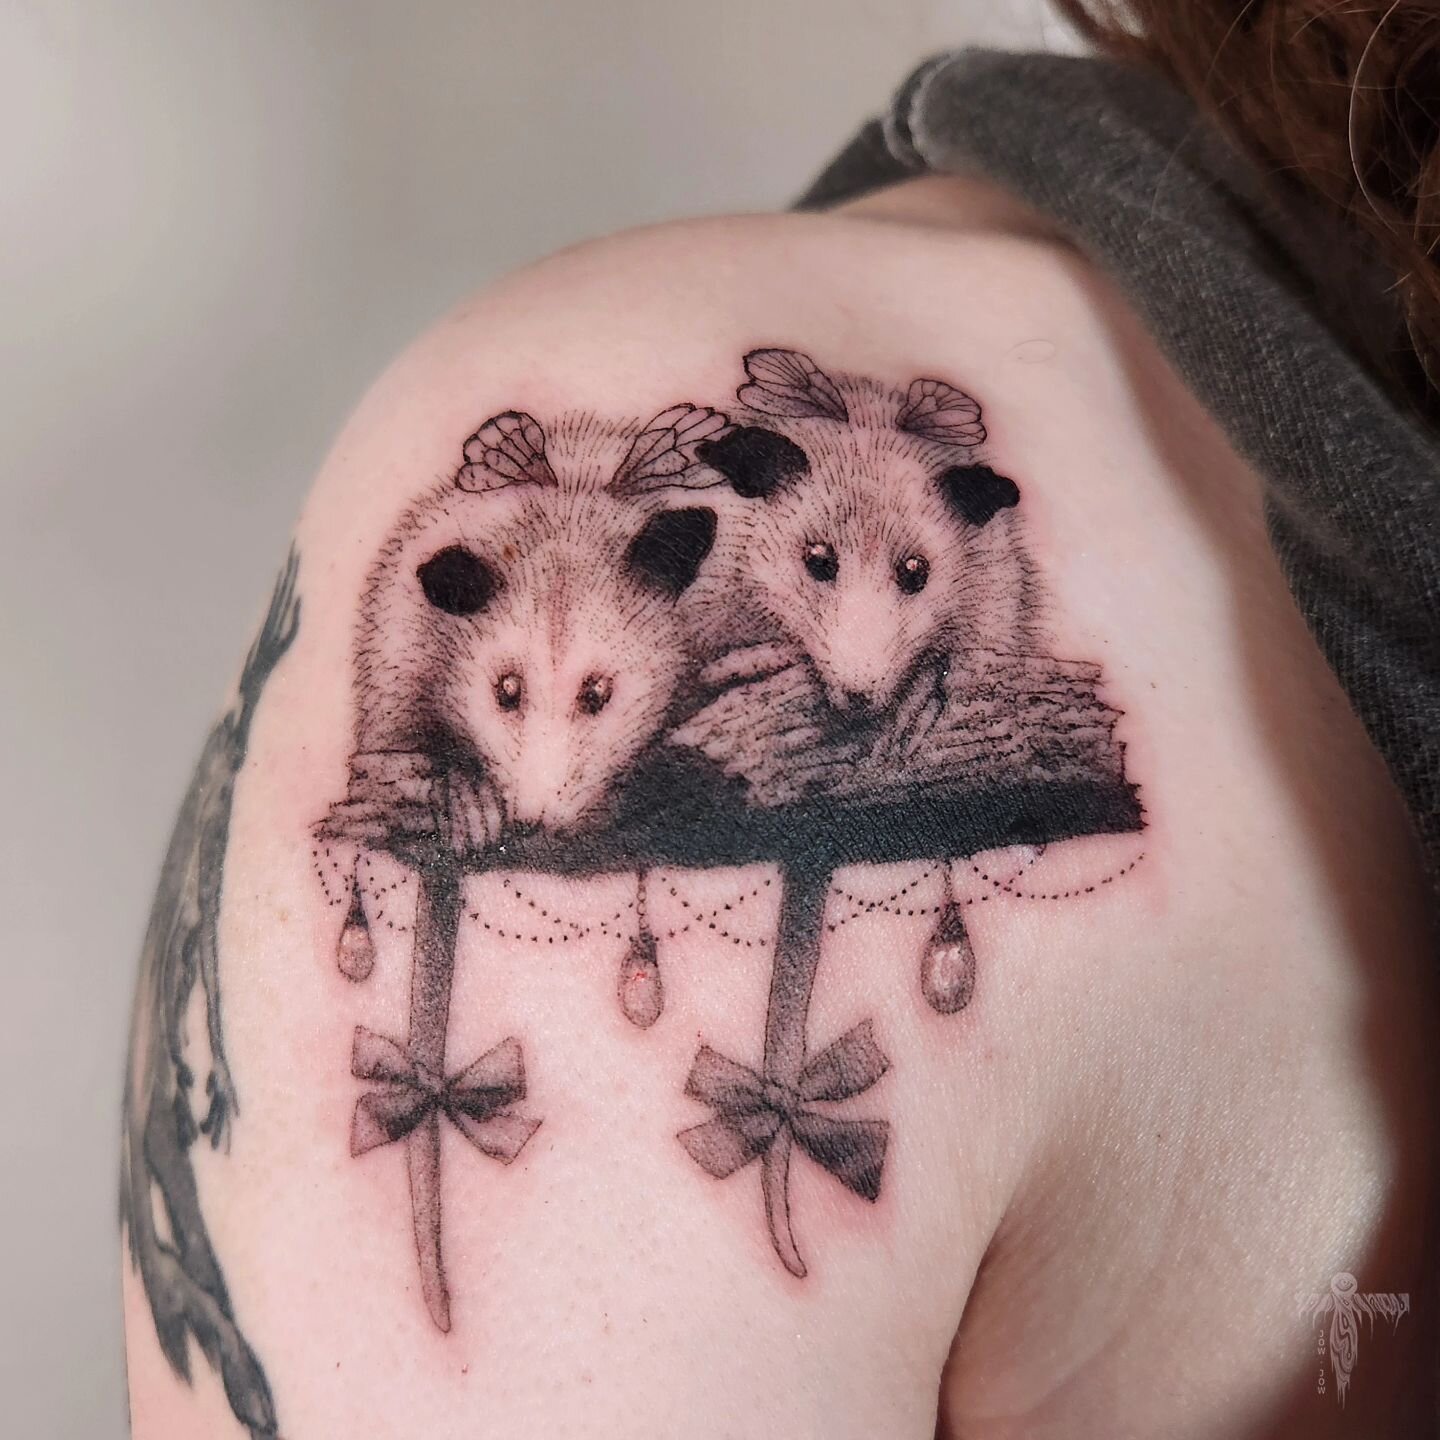 &mdash; 𝙊𝙥𝙤𝙨𝙨𝙪𝙢 𝙁𝙖𝙞𝙧𝙞𝙚𝙨 &mdash;

For Mac &mdash; Thank you for giving these critters a home. I love the placement you chose, having them perched on the shoulder/ clavicle. :3

[ 2.5 hrs ]

#opossumfairies #opposumtattoos #animaltattoos 